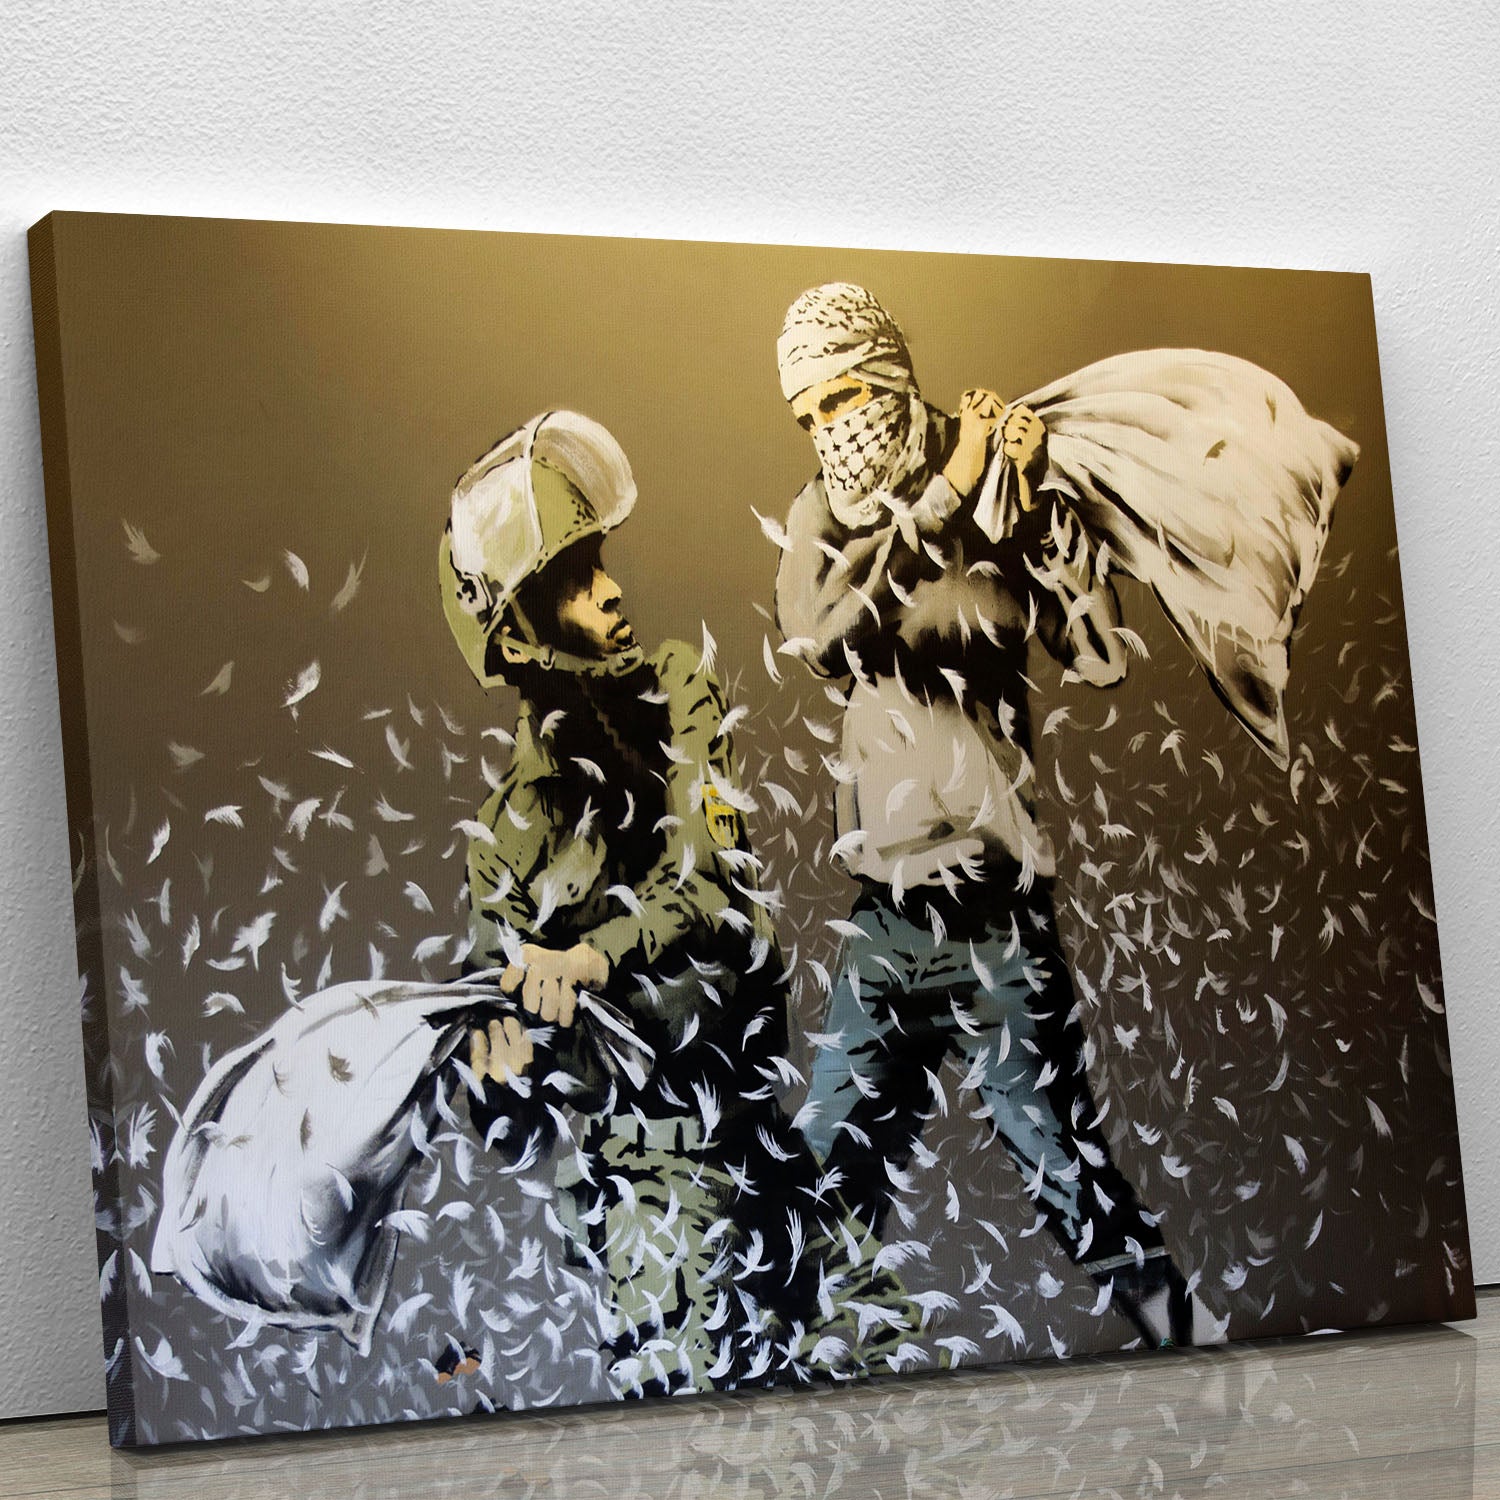 Banksy Israeli or Palestinian Pillow Fight Notebook